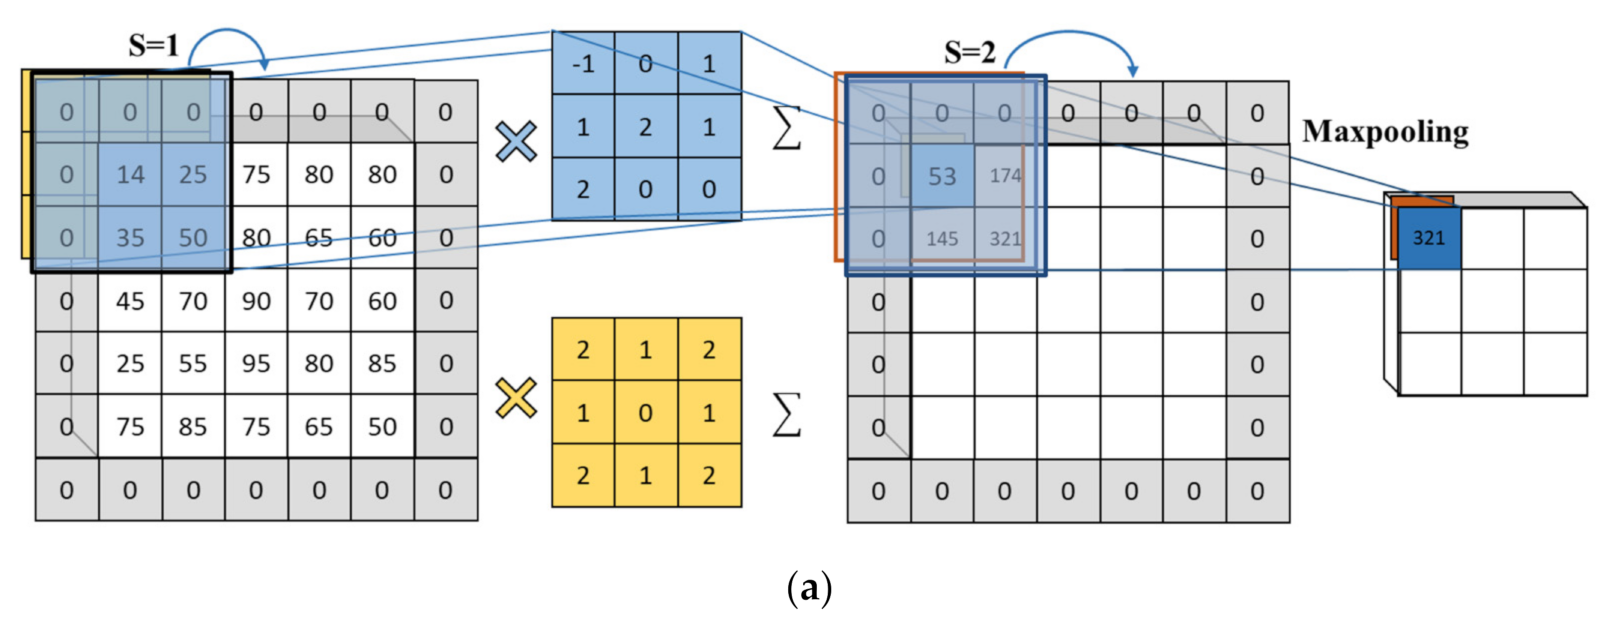 Applied Sciences | Free Full-Text | Deep Learning Model for the ...